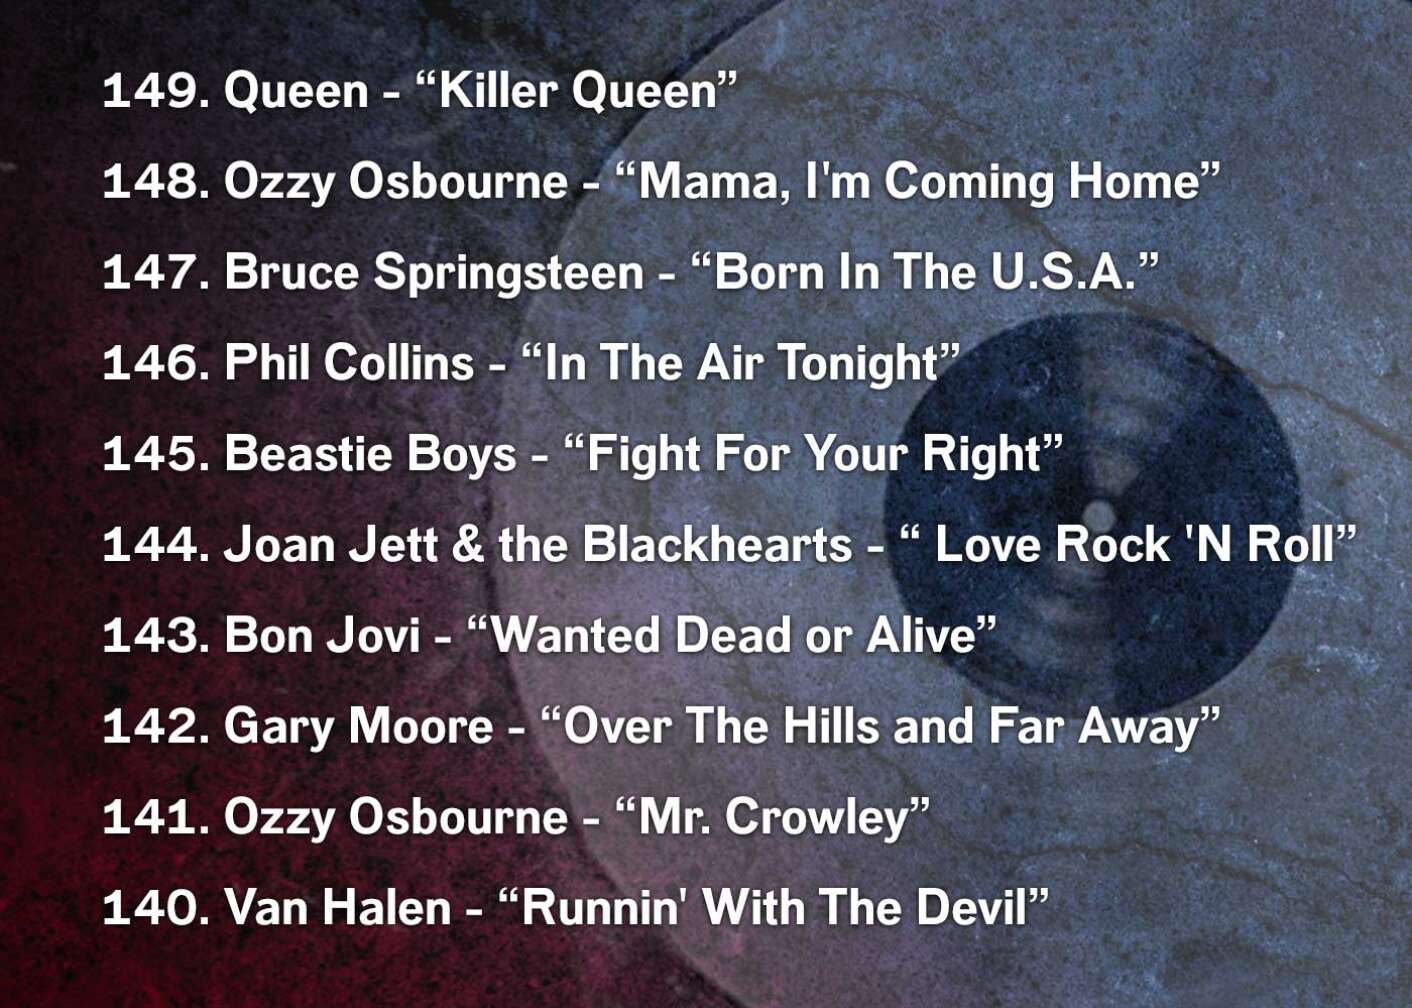 149. Queen - “Killer Queen” 148. Ozzy Osbourne - “Mama, I'm Coming Home” 147. Bruce Springsteen - “Born In The U.S.A.” 146. Phil Collins - “In The Air Tonight” 145. Beastie Boys - “Fight For Your Right” 144. Joan Jett & the Blackhearts - “ Love Rock 'N Roll” 143. Bon Jovi - “Wanted Dead or Alive” 142. Gary Moore - “Over The Hills and Far Away” 141. Ozzy Osbourne - “Mr. Crowley” 140. Van Halen - “Runnin' With The Devil”